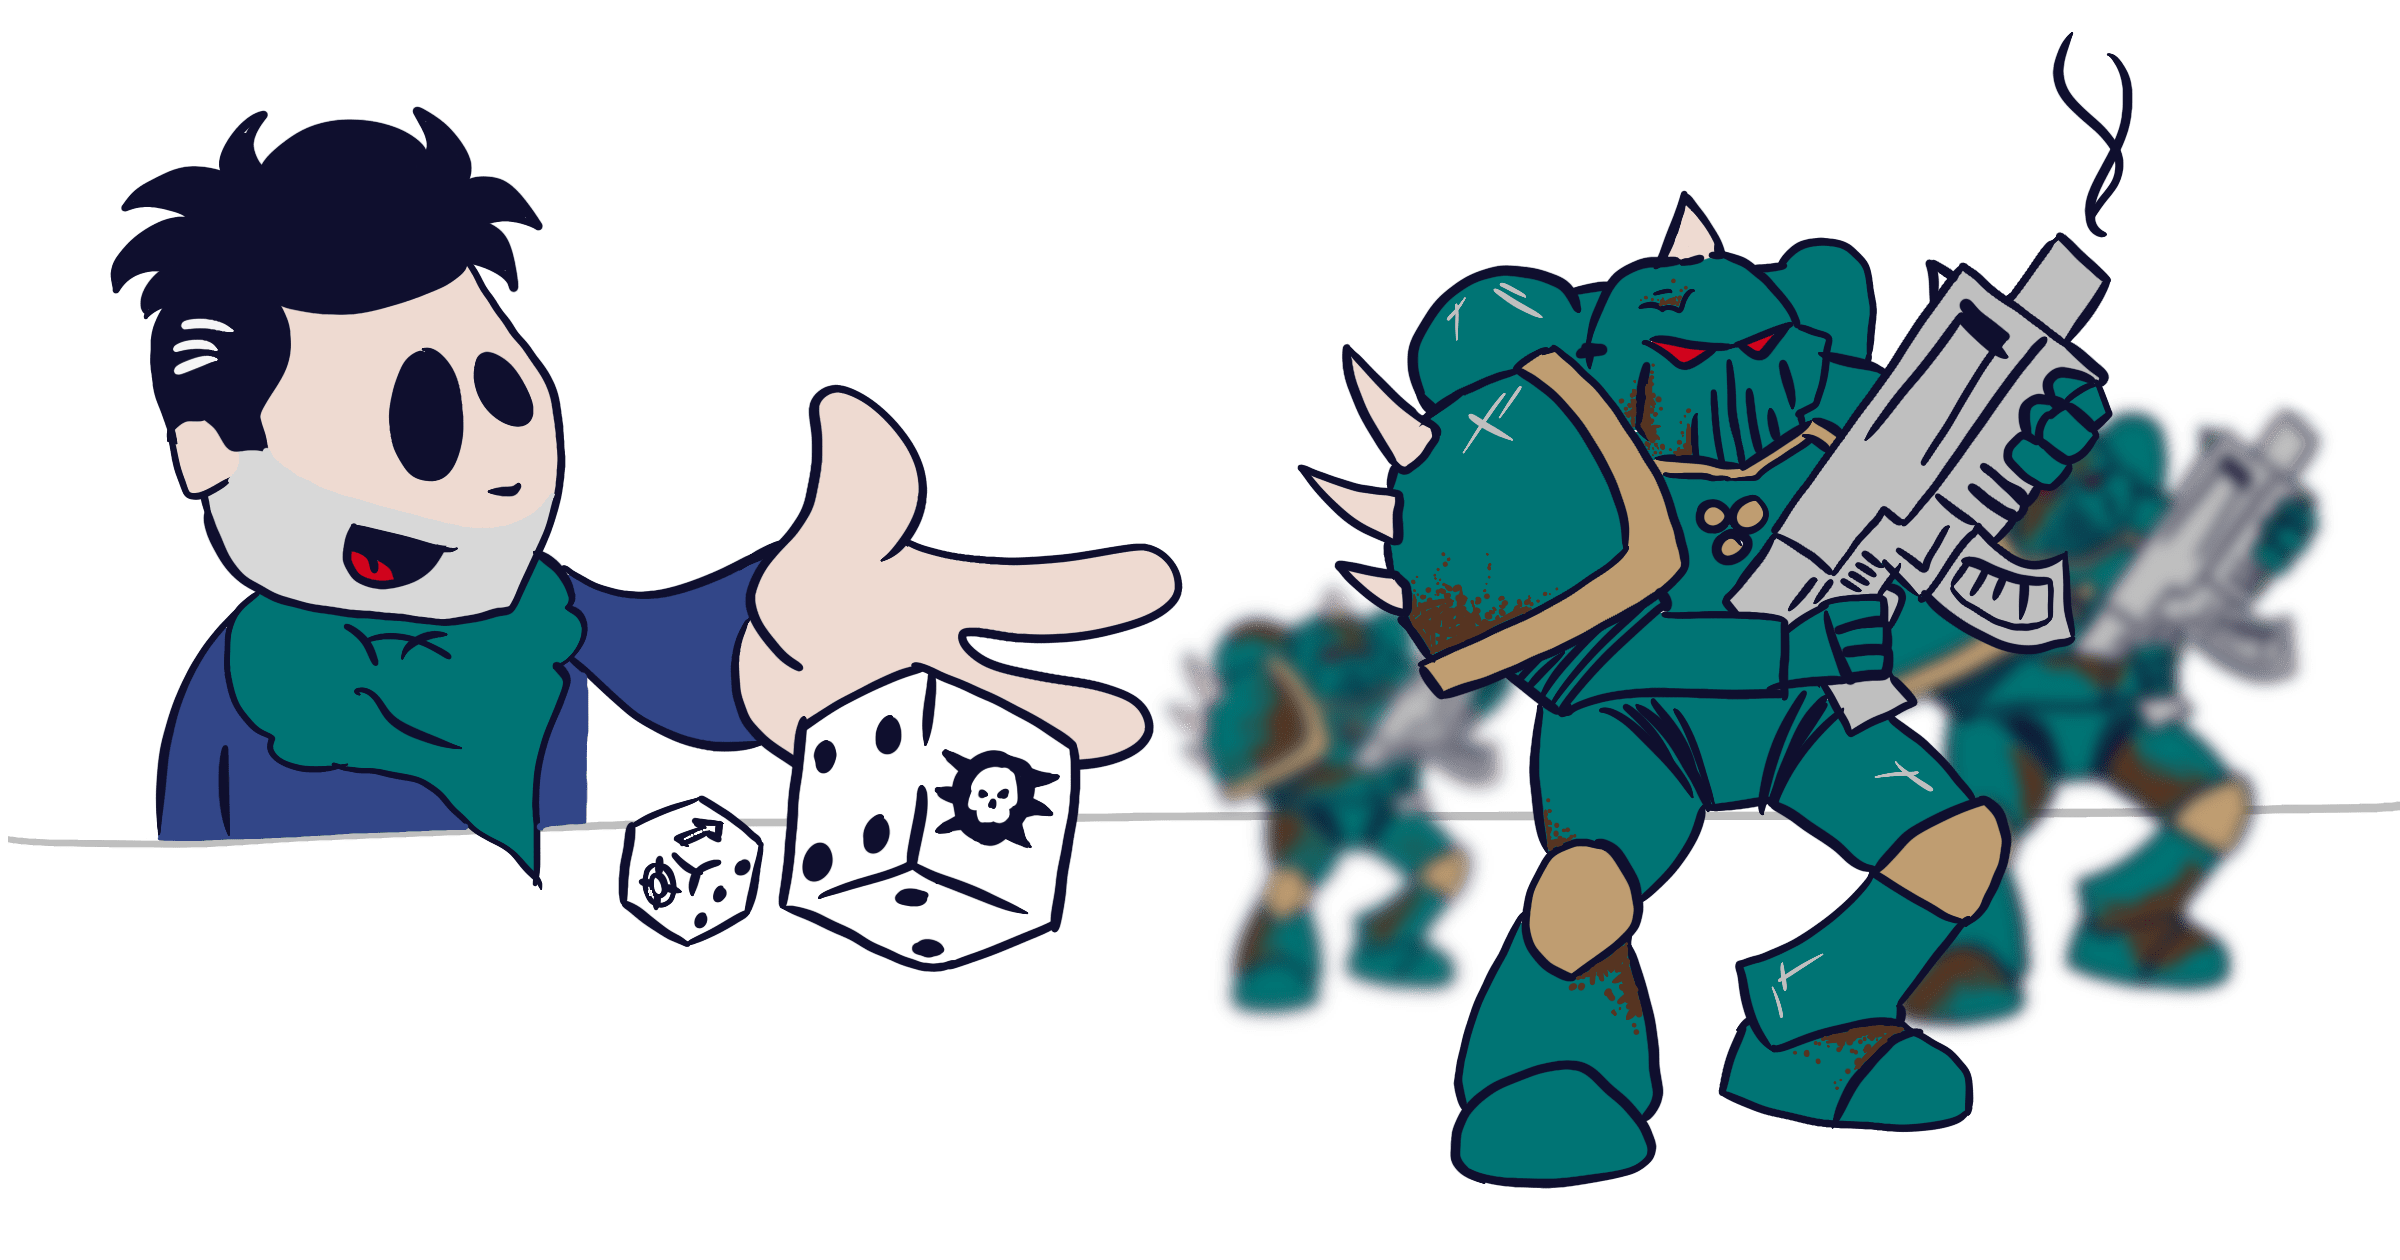 Carlos Eriksson illustrated as a Disney character rolling dice to play Warhammer 40,000 with his Death Guard army, multiple chaos space marines standing in front of him.